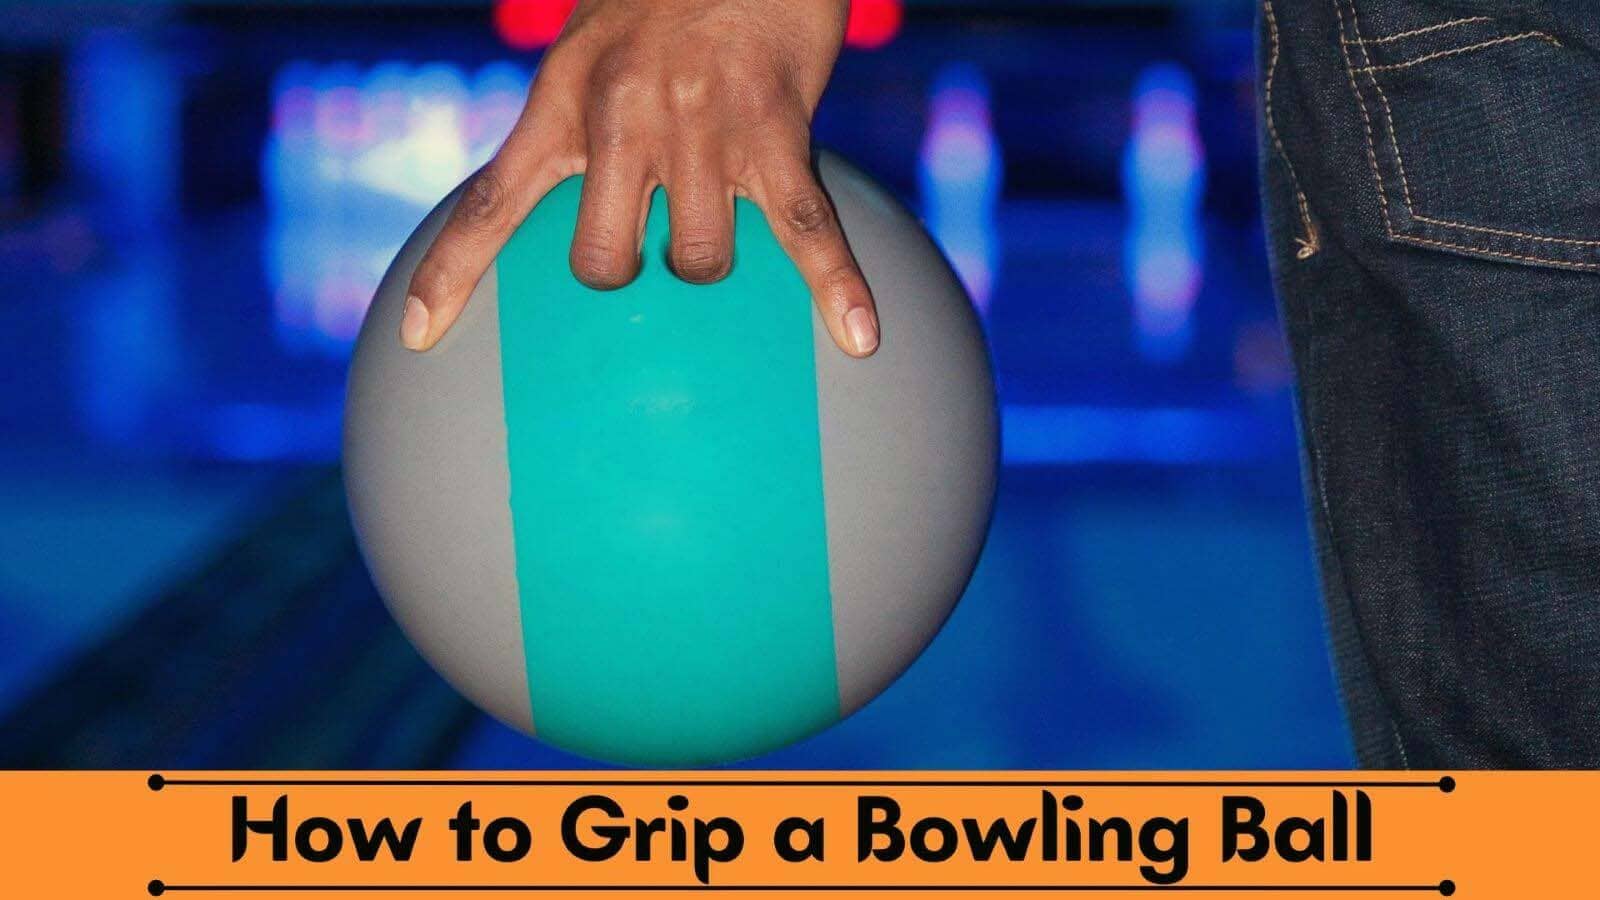 How to Grip a Bowling Ball